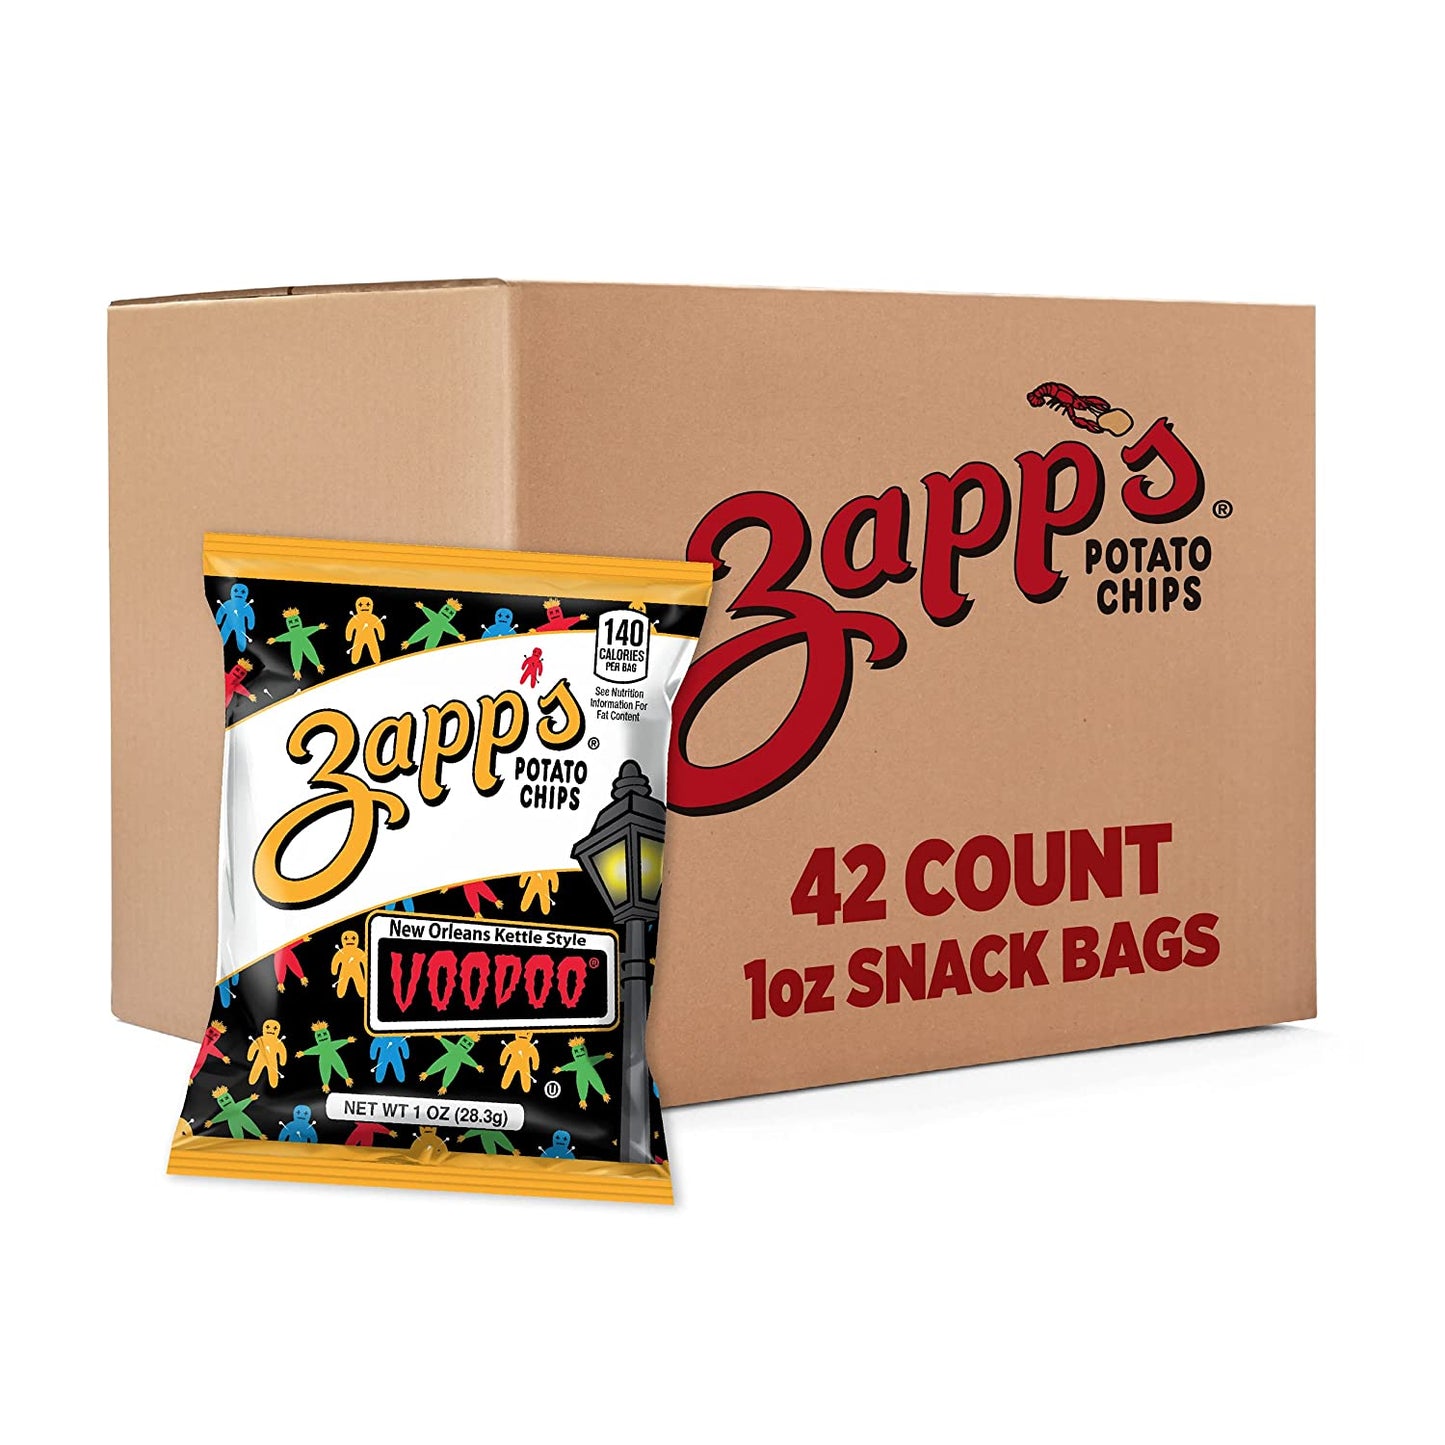 Zapp's New Orleans Kettle-Style Potato Chips, Voodoo Flavor (1 oz Bags, 42 Count) ââ‚¬â€œ Crunchy Chips with Salt & Vinegar Tang and Smoky BBQ Sweetness, Gluten Free, Perfect On-The-Go Snack